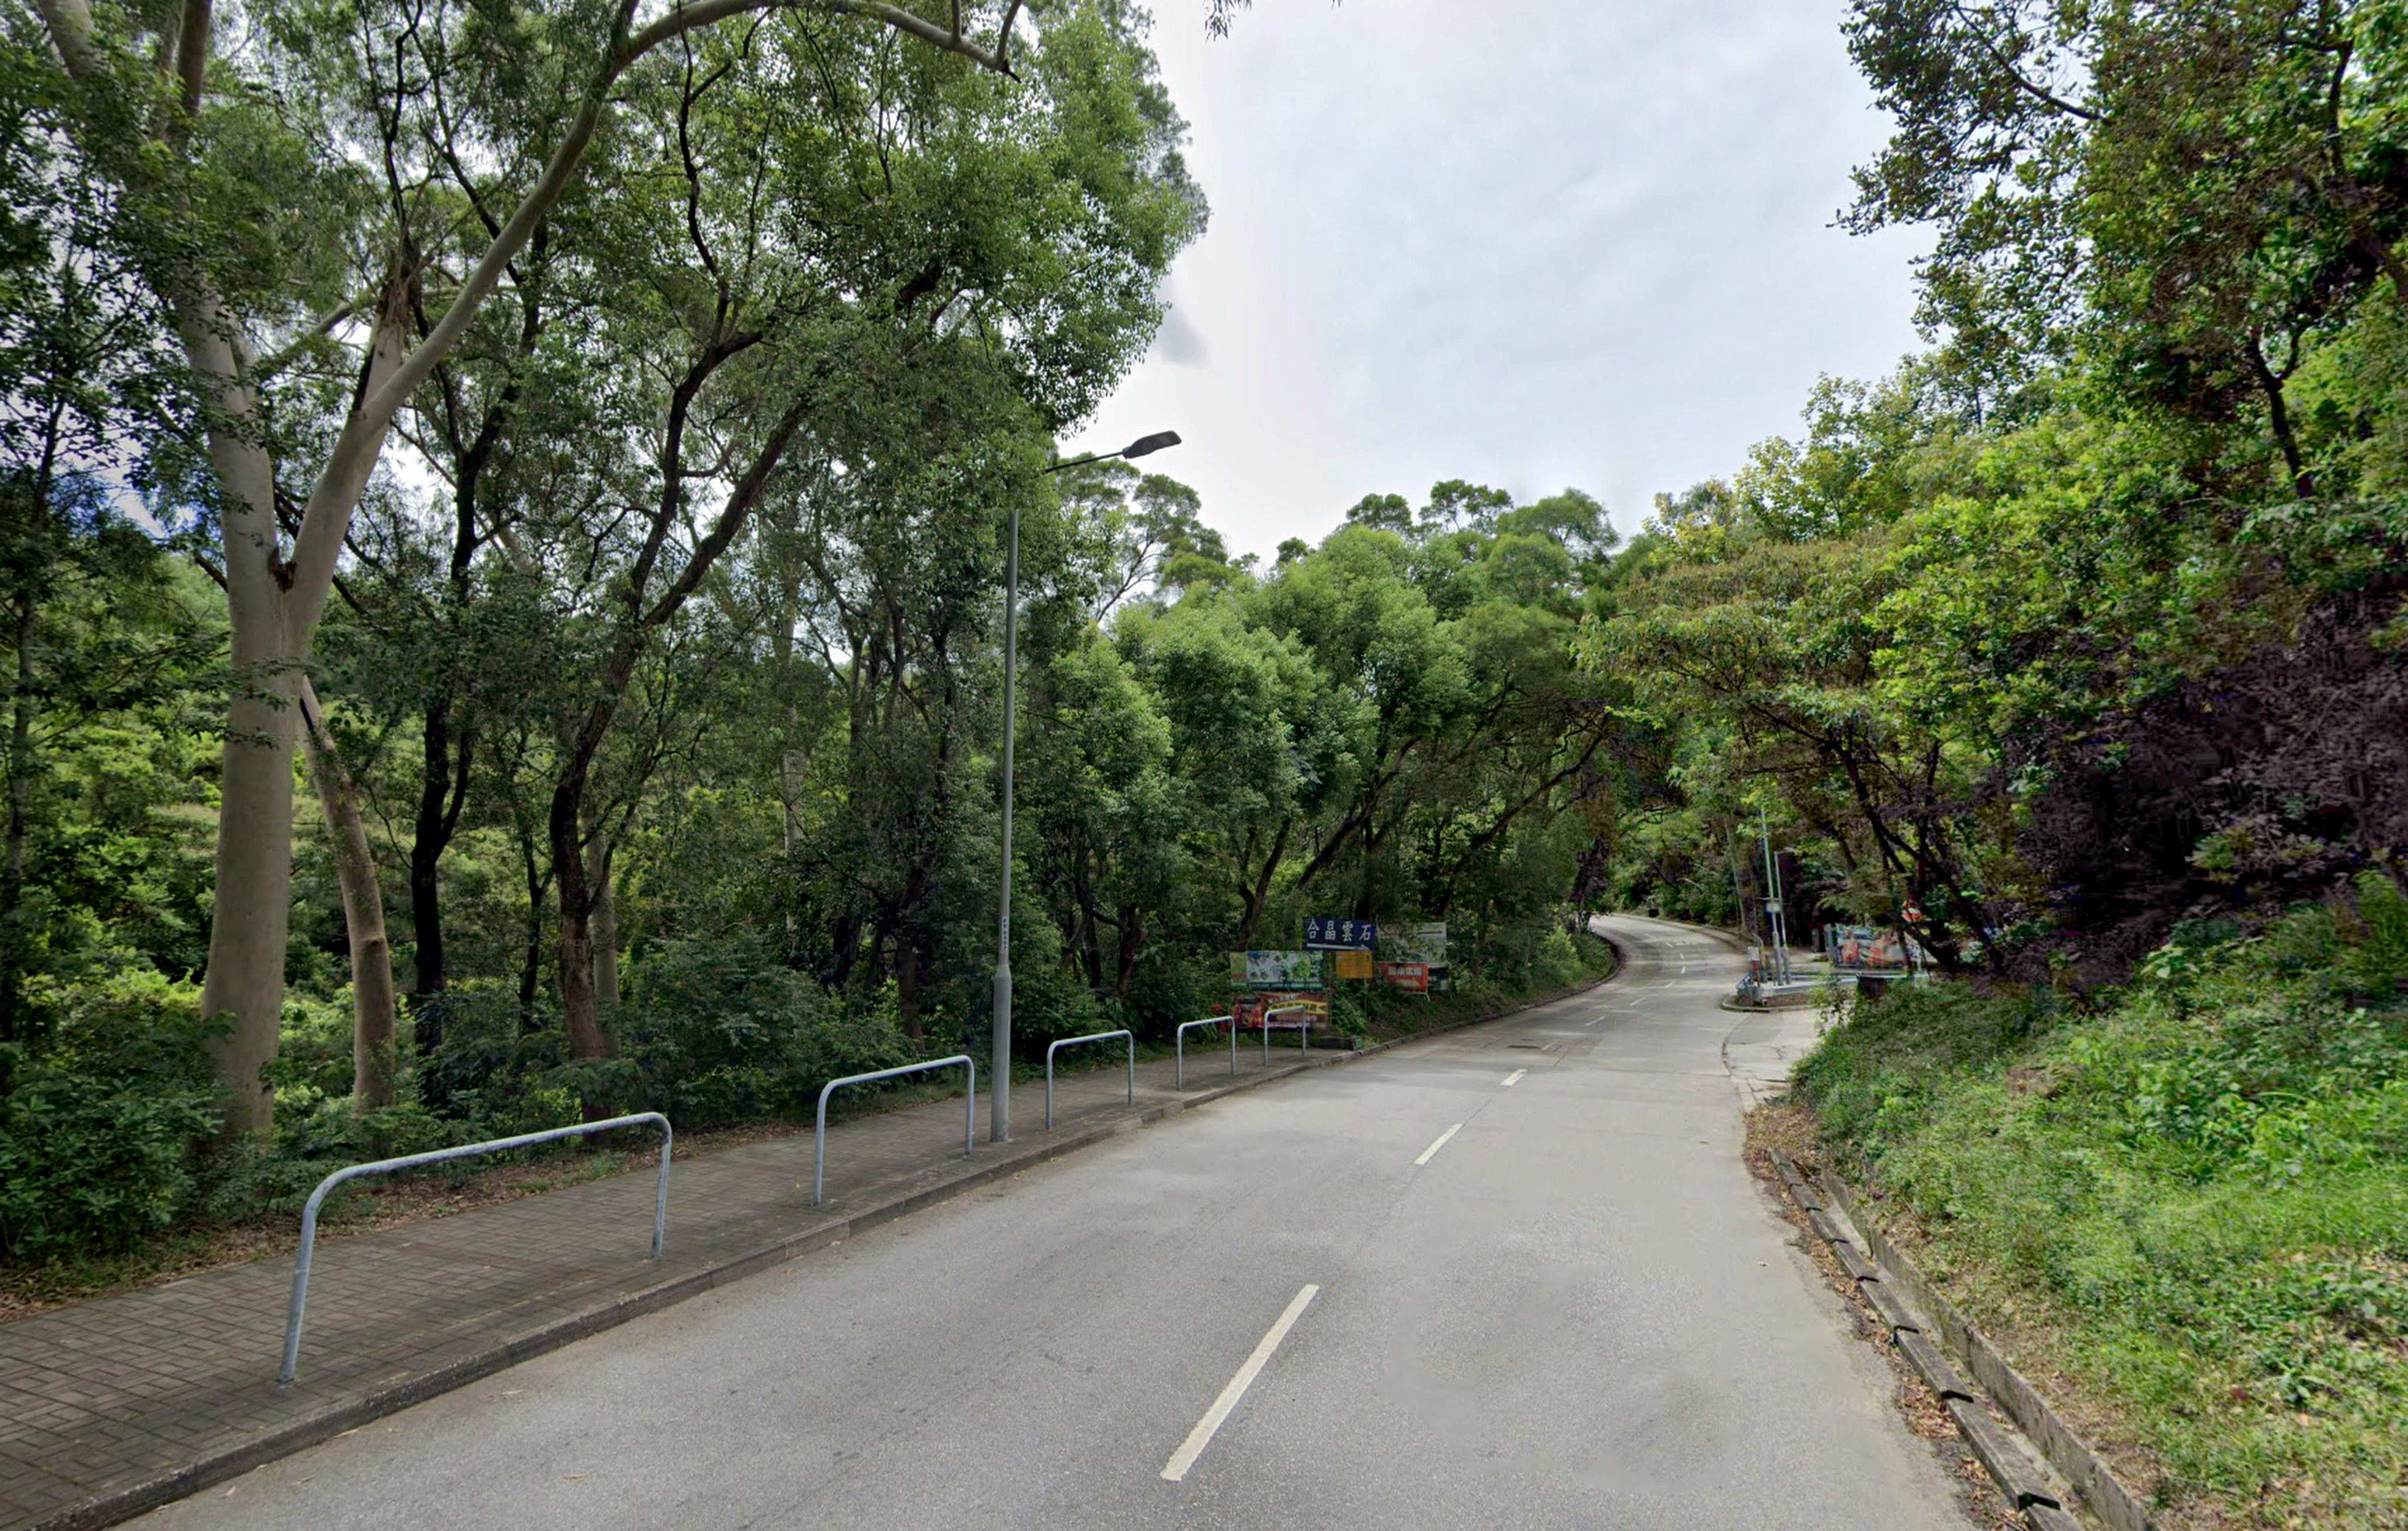 A motorcyclist has died after losing control and crashing into a railing on Tai Tong Shan Road. Photo: Google Maps